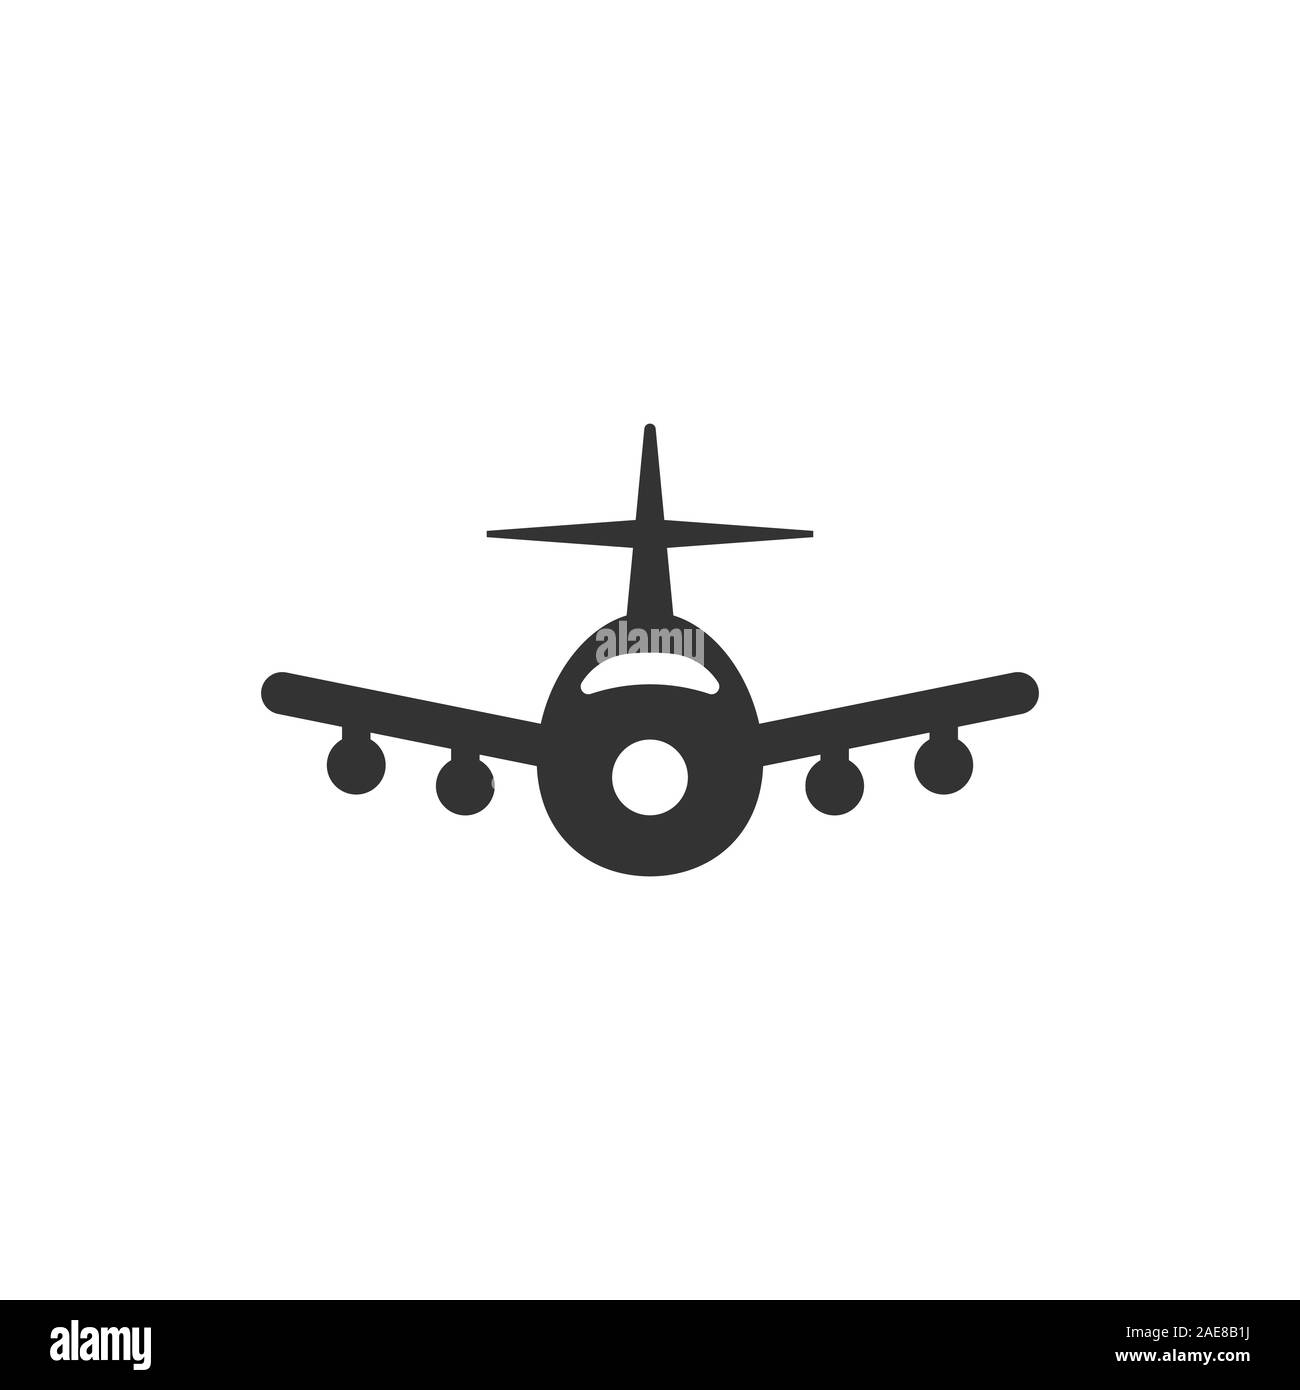 Plane icon in flat style. Airplane vector illustration on white isolated background. Flight airliner business concept. Stock Vector